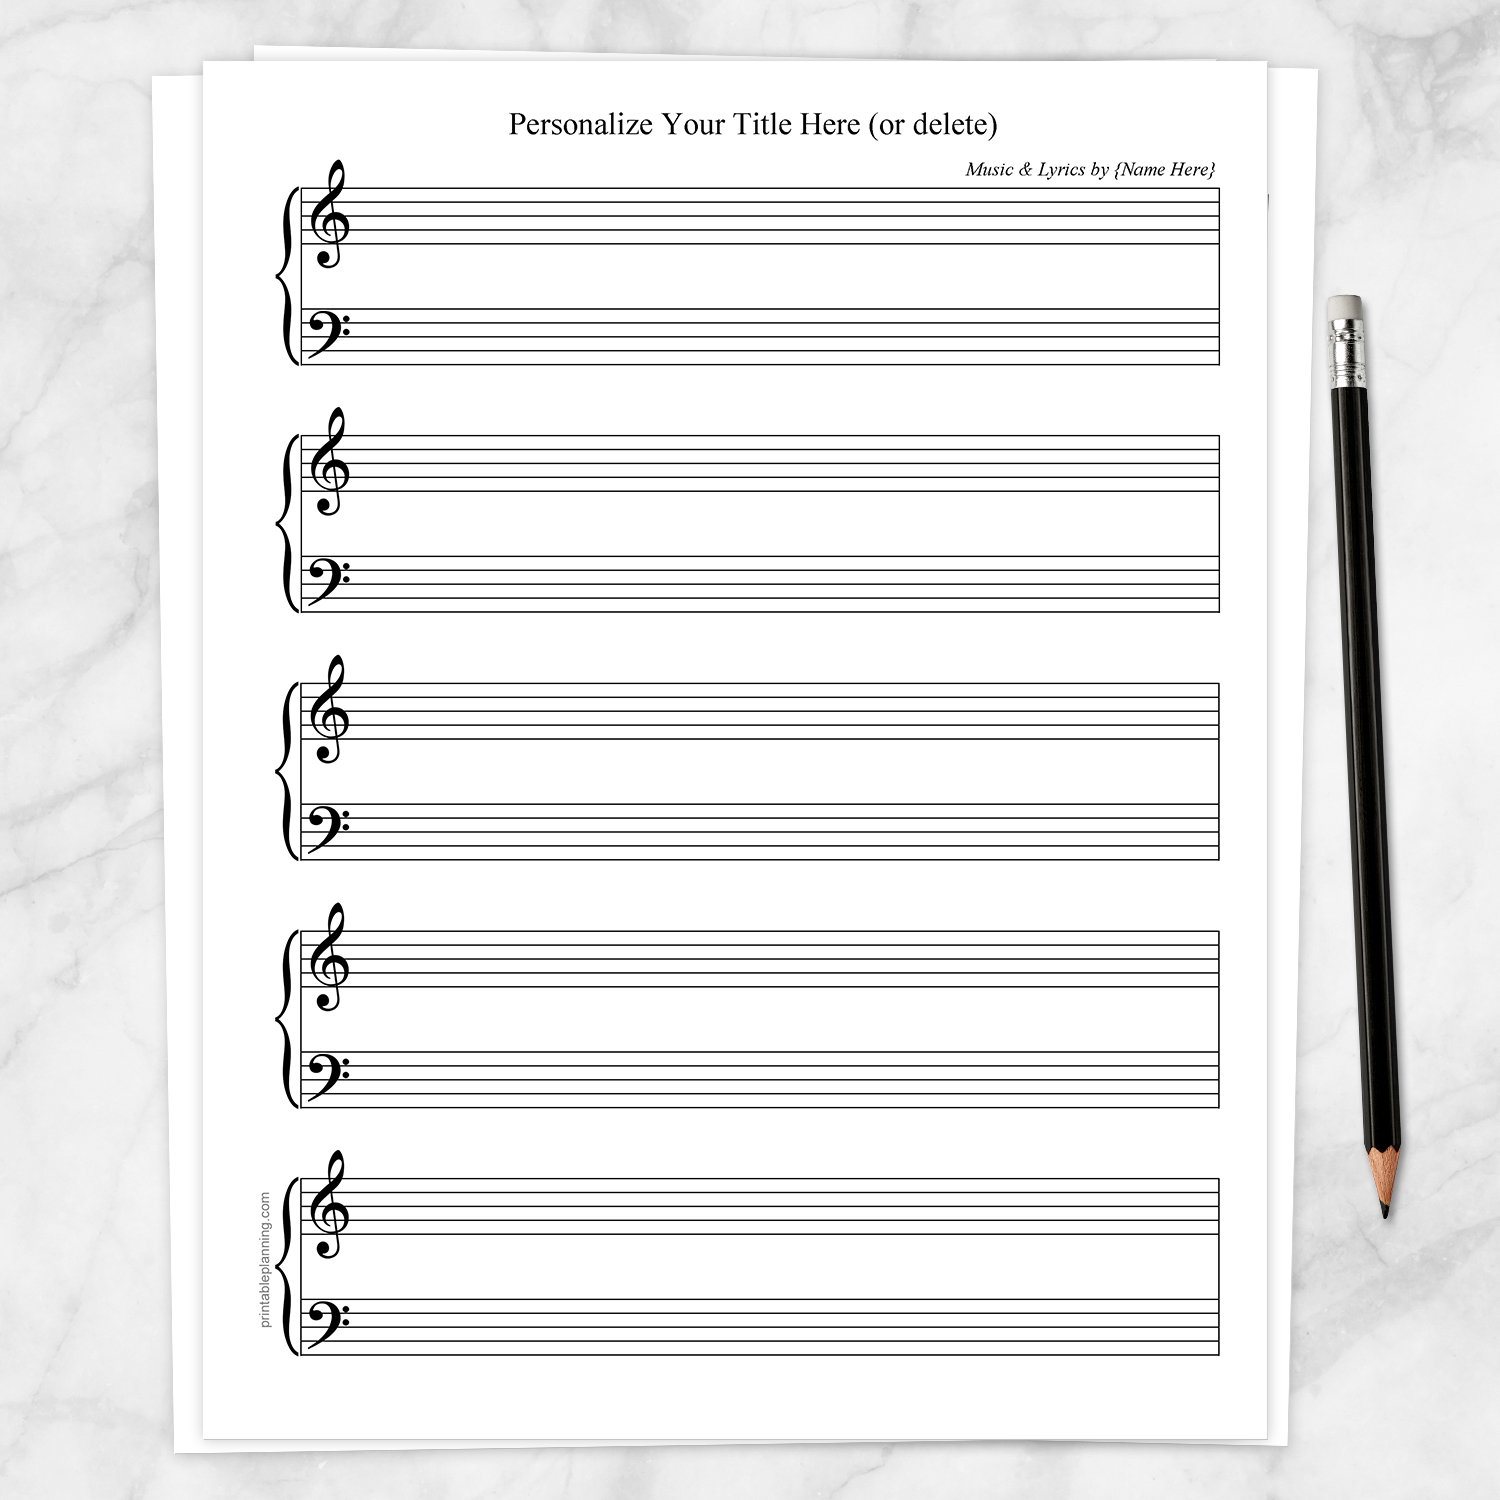 Printable Personalized Blank Piano and Vocals Sheet Music at Printable Planning